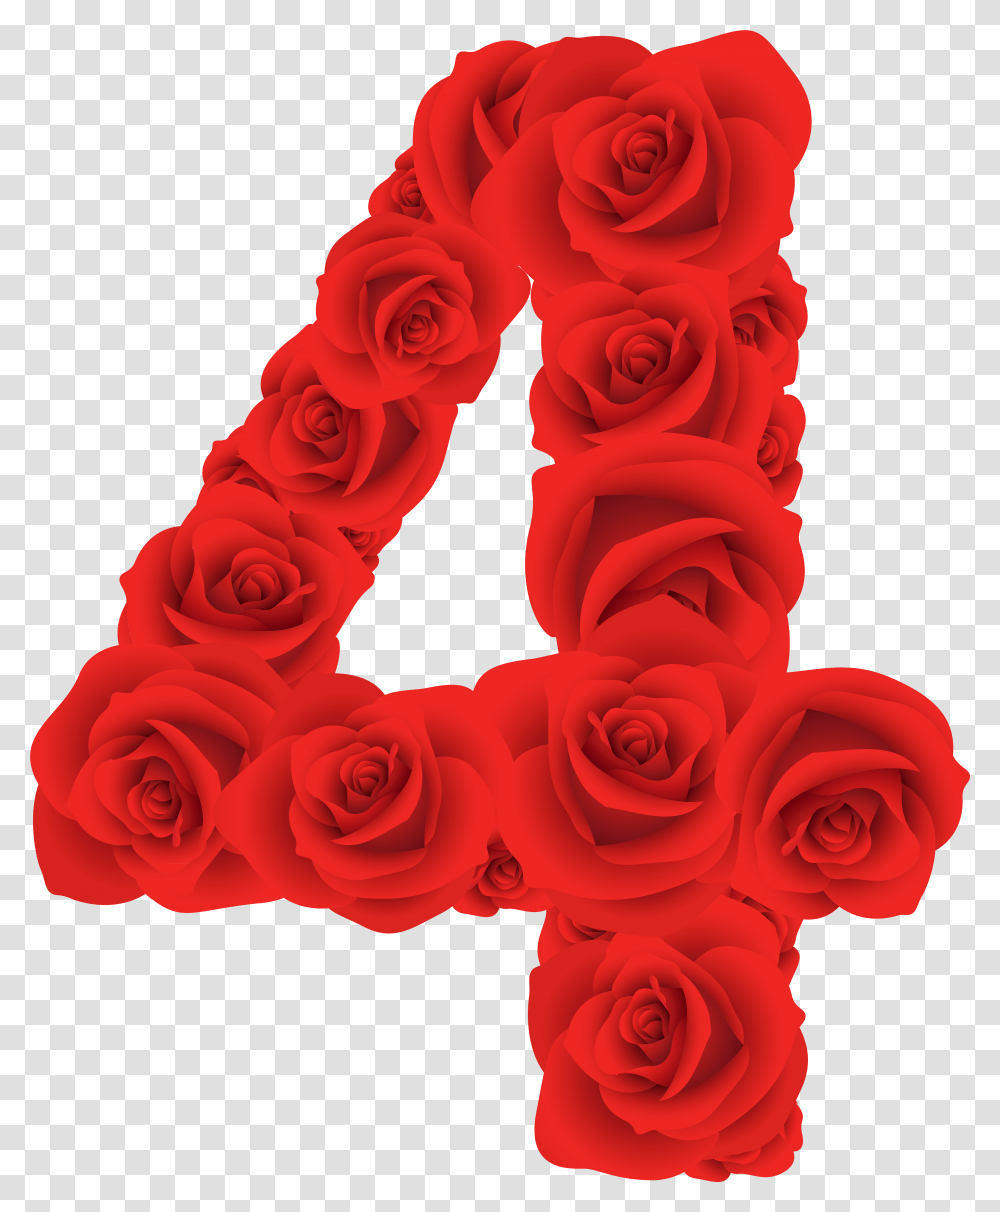 Four Clipart Rose Number 4 In Roses Transparent Png